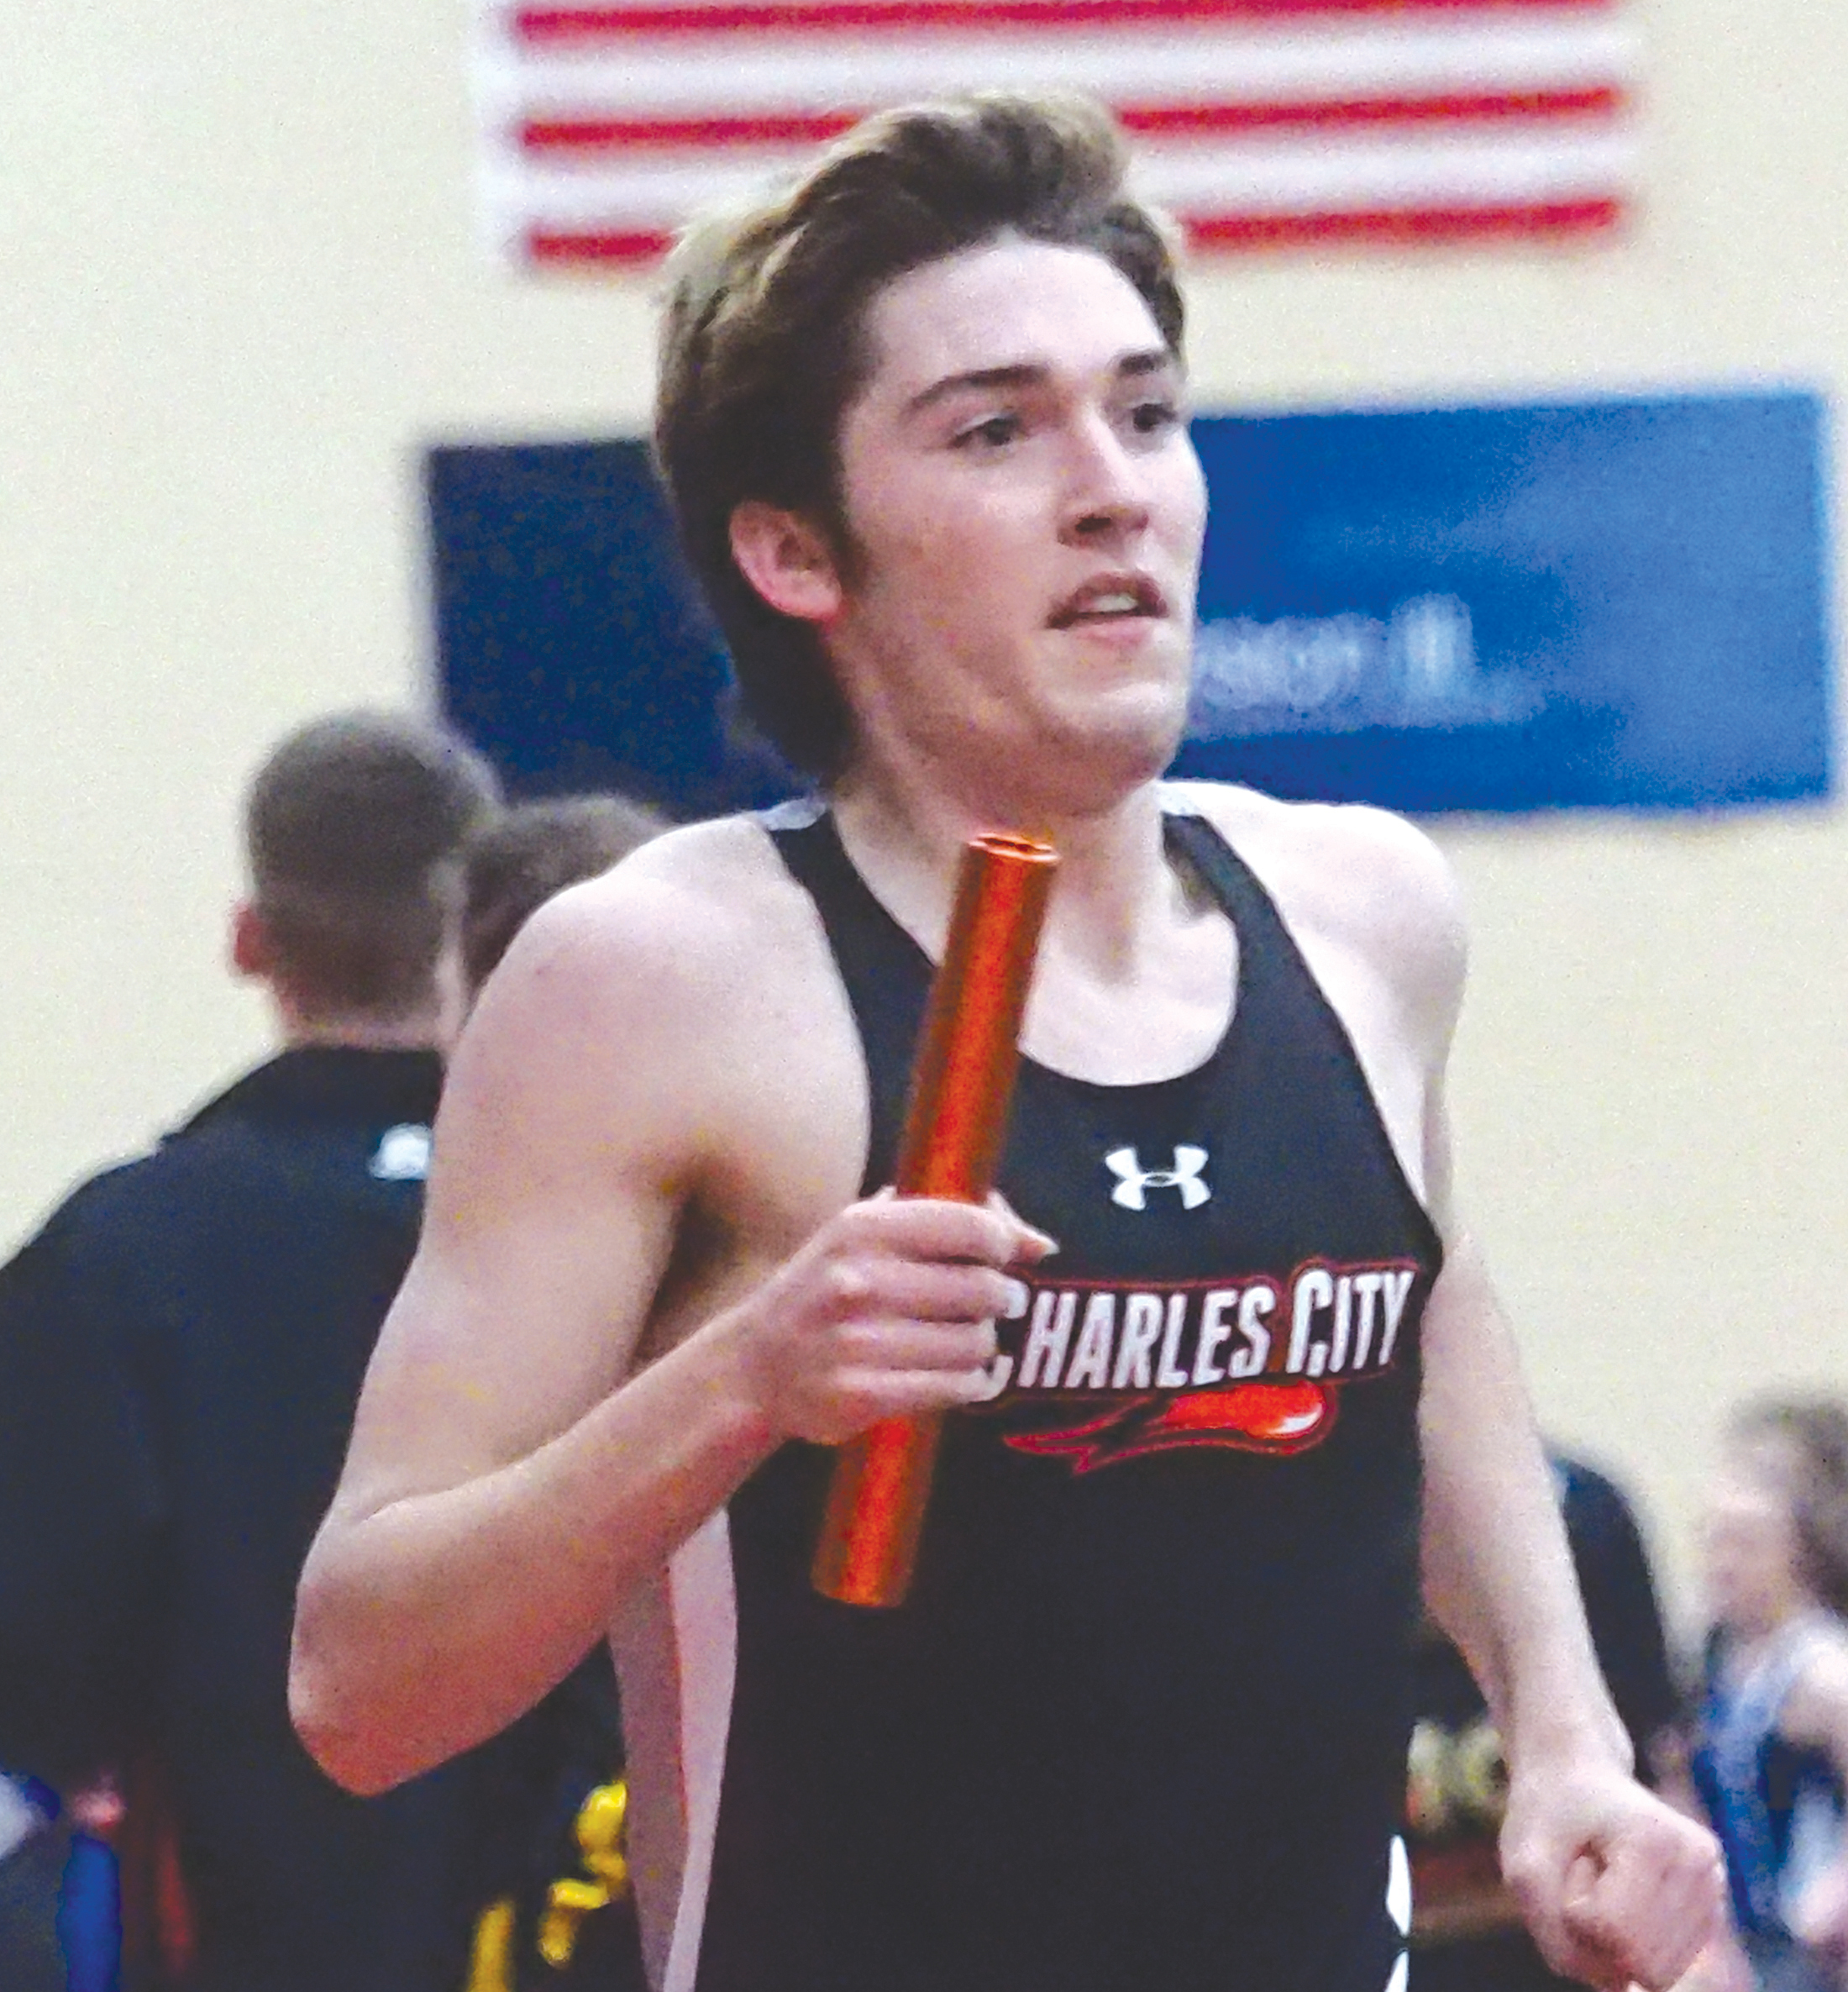 Gavin Connell sets PR with 3,200 win at Pirate Relays